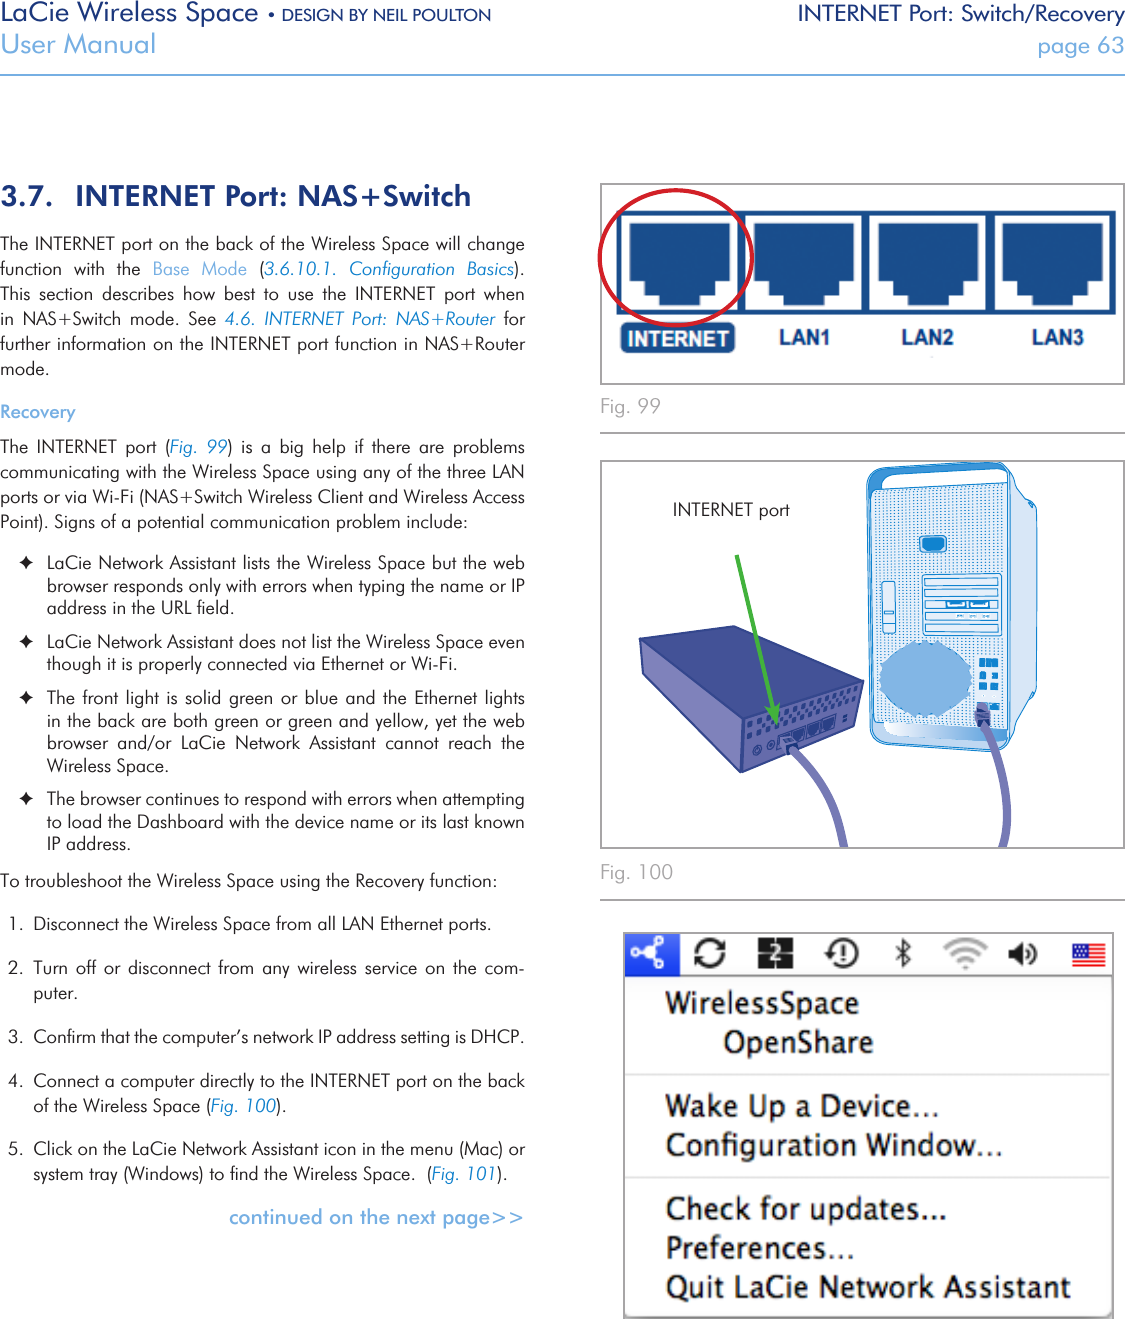 LaCie Wireless Space • DESIGN BY NEIL POULTON INTERNET Port: Switch/RecoveryUser Manual  page 63Fig. 99 Fig. 100 Fig. 101 3.7.  INTERNET Port: NAS+SwitchThe INTERNET port on the back of the Wireless Space will change function  with  the  Base  Mode  (3.6.10.1.  Conﬁguration  Basics). This  section  describes  how  best  to  use  the  INTERNET  port  when in  NAS+Switch  mode.  See  4.6.  INTERNET  Port:  NAS+Router  for further information on the INTERNET port function in NAS+Router mode.RecoveryThe  INTERNET  port  (Fig.  99)  is  a  big  help  if  there  are  problems communicating with the Wireless Space using any of the three LAN ports or via Wi-Fi (NAS+Switch Wireless Client and Wireless Access Point). Signs of a potential communication problem include: ✦LaCie Network Assistant lists the Wireless Space but the web browser responds only with errors when typing the name or IP address in the URL ﬁeld. ✦LaCie Network Assistant does not list the Wireless Space even though it is properly connected via Ethernet or Wi-Fi.  ✦The front light  is solid green or blue  and the Ethernet lights in the back are both green or green and yellow, yet the web browser  and/or  LaCie  Network  Assistant  cannot  reach  the Wireless Space.  ✦The browser continues to respond with errors when attempting to load the Dashboard with the device name or its last known IP address.To troubleshoot the Wireless Space using the Recovery function:1.  Disconnect the Wireless Space from all LAN Ethernet ports.2.  Turn  off  or  disconnect  from any  wireless  service  on  the com-puter.3.  Conﬁrm that the computer’s network IP address setting is DHCP.4.  Connect a computer directly to the INTERNET port on the back of the Wireless Space (Fig. 100).5.  Click on the LaCie Network Assistant icon in the menu (Mac) or system tray (Windows) to ﬁnd the Wireless Space.  (Fig. 101).continued on the next page&gt;&gt;INTERNET port